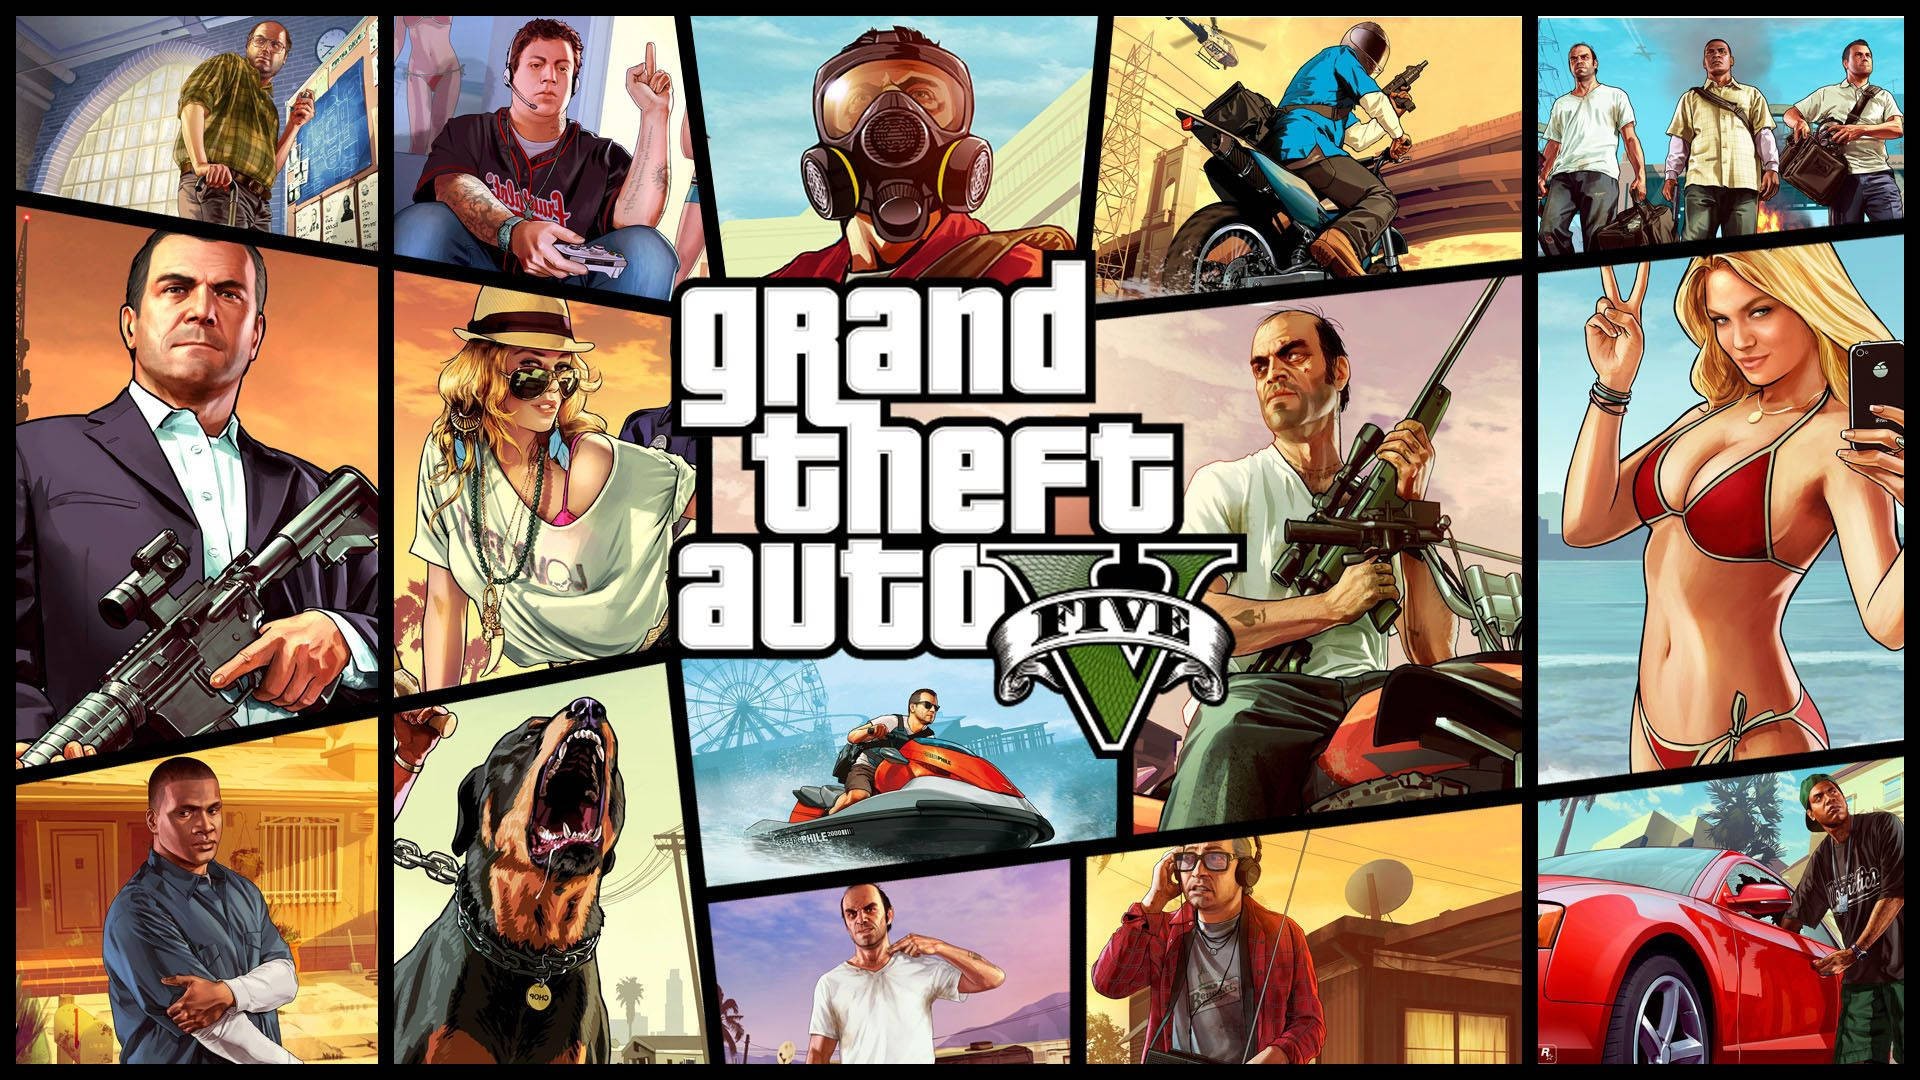 GTA 5: The Game completes 10 years of release with fans wanting to continue the franchise